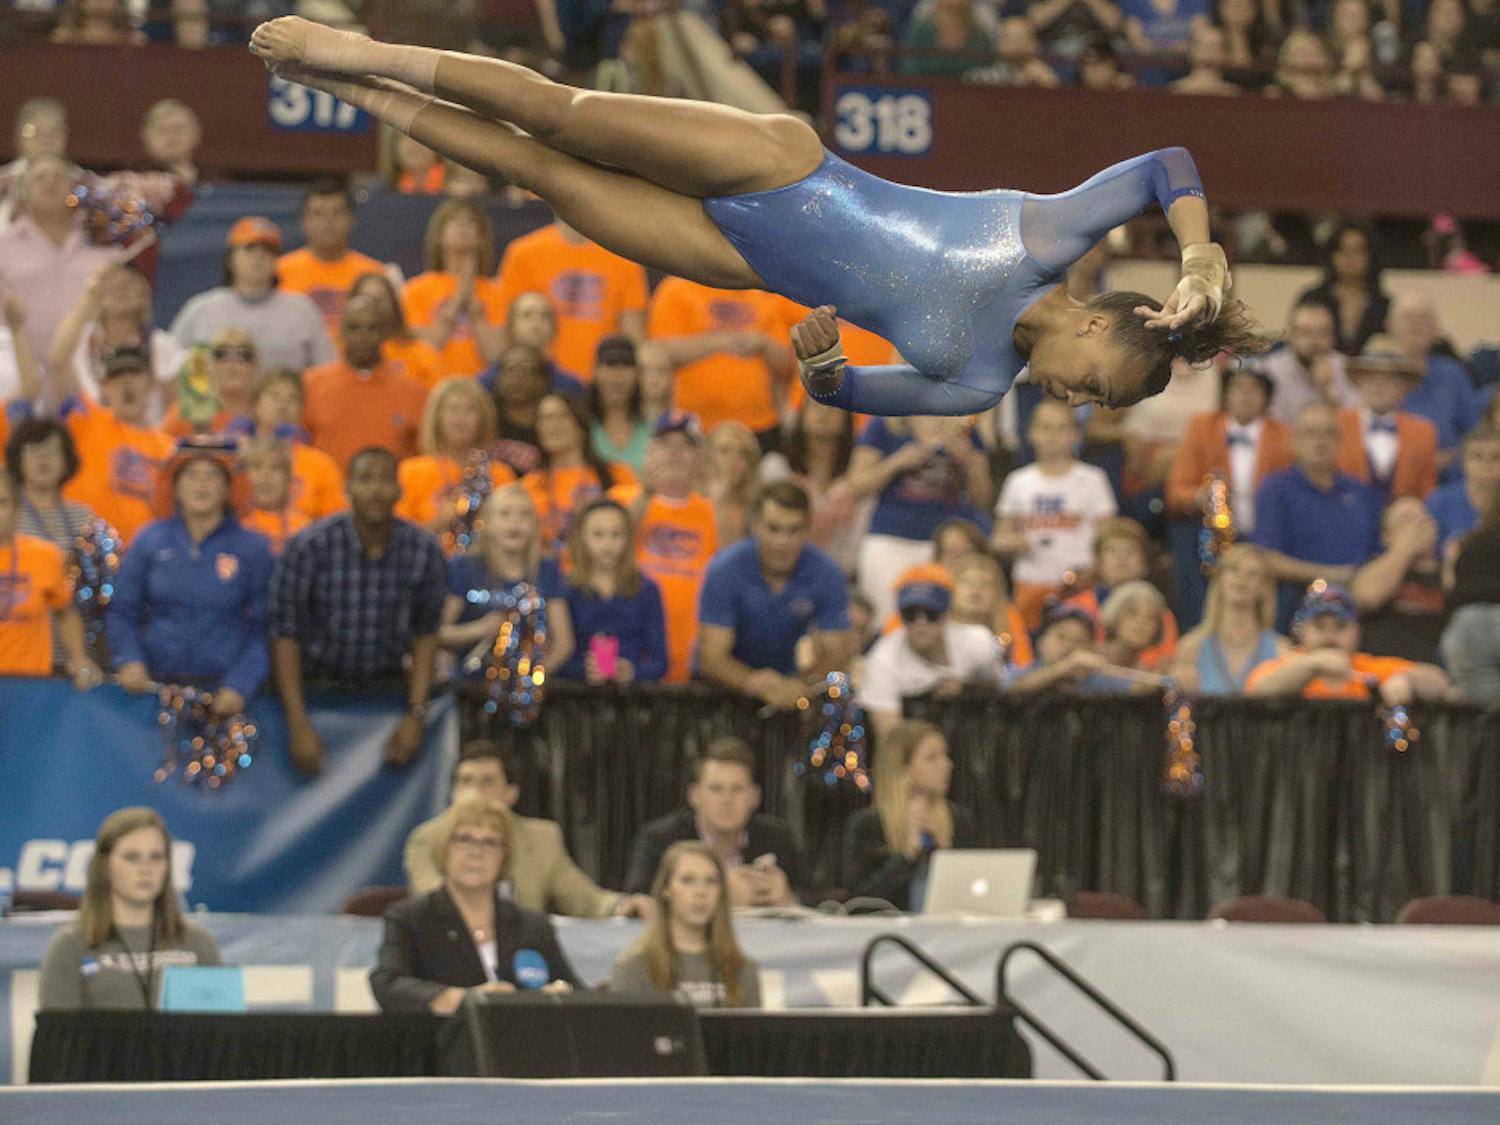 Florida senior all-arounder Kytra Hunter performs her floor routine where she scored 9.975 during the 2015 NCAA gymnastics championships on Saturday, April 18, 2015 in Fort Worth, Texas.